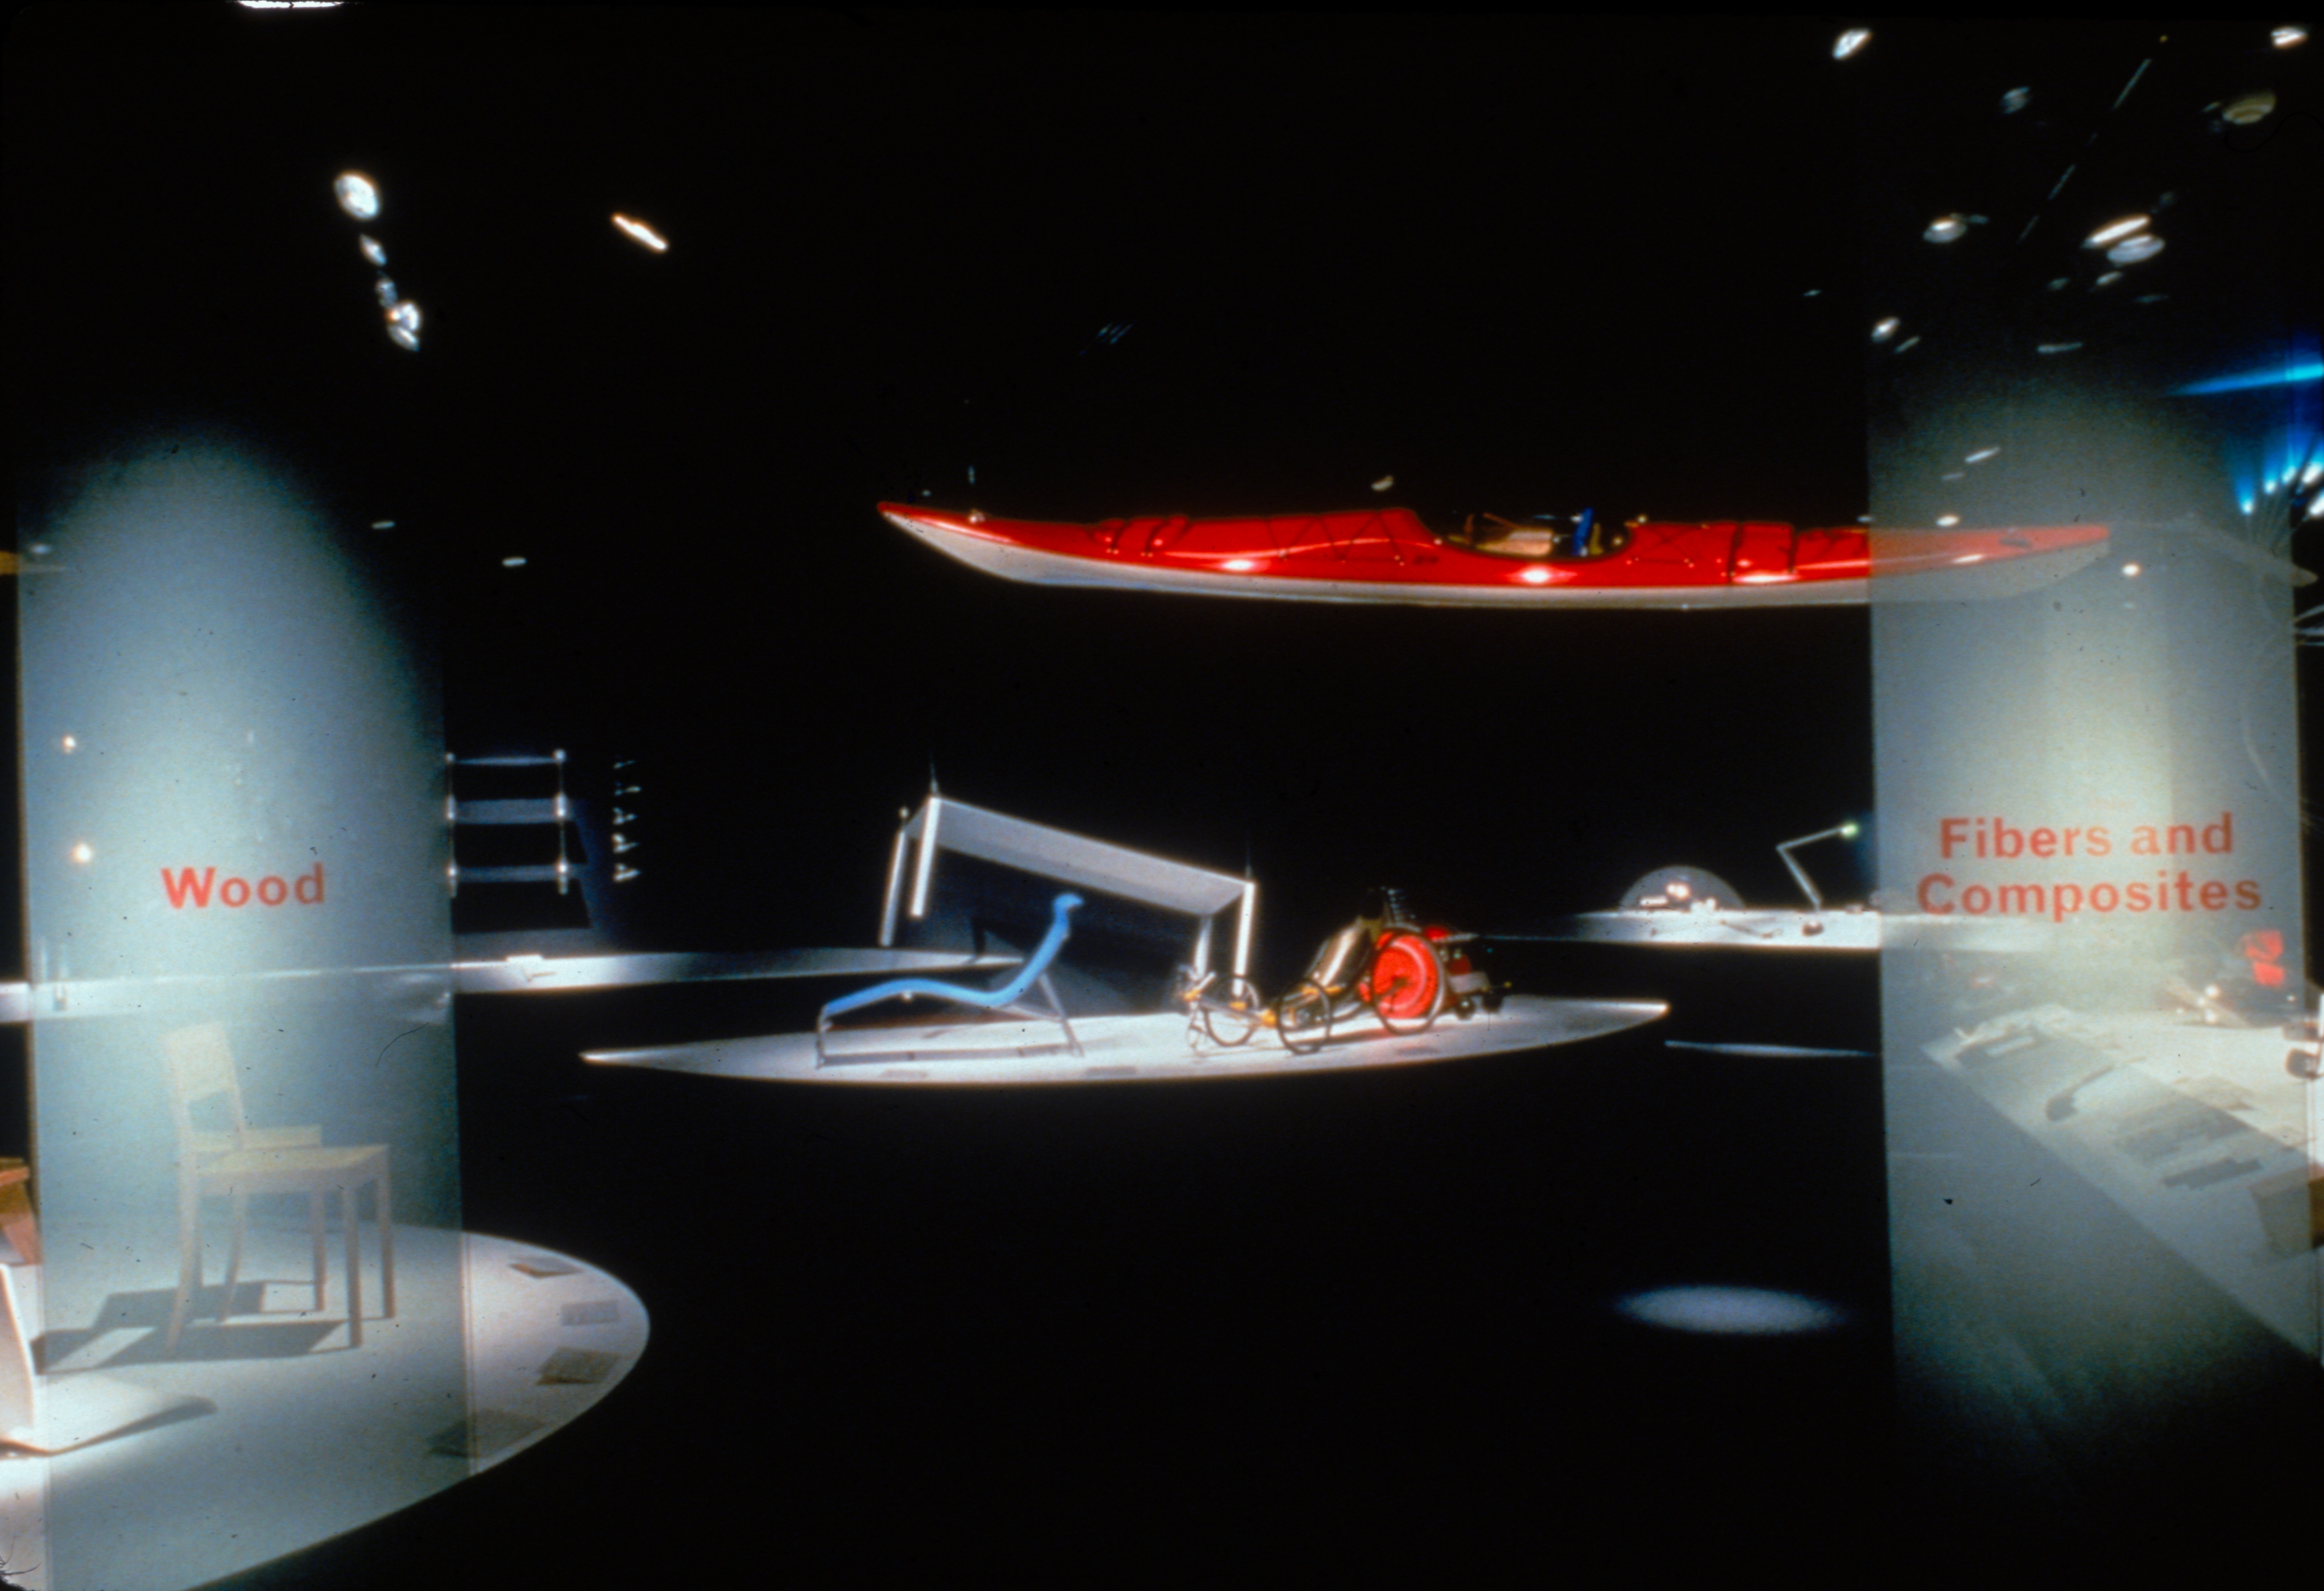 Installation view of the exhibition Mutant Materials in Contemporary Design, on view at The Museum of Modern Art